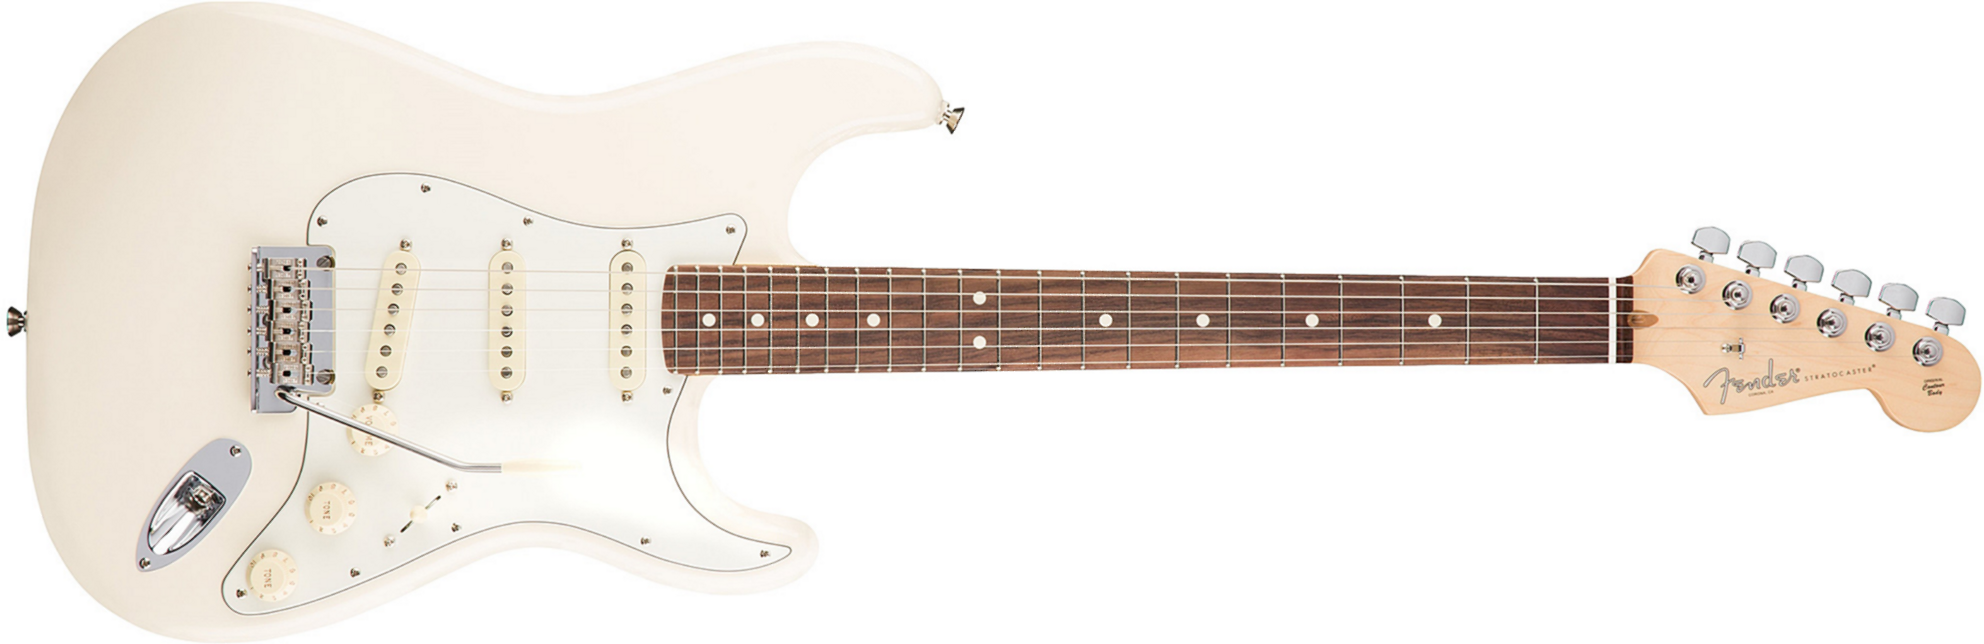 Fender Strat American Professional 2017 3s Usa Rw - Olympic White - Guitare Électrique Forme Str - Main picture